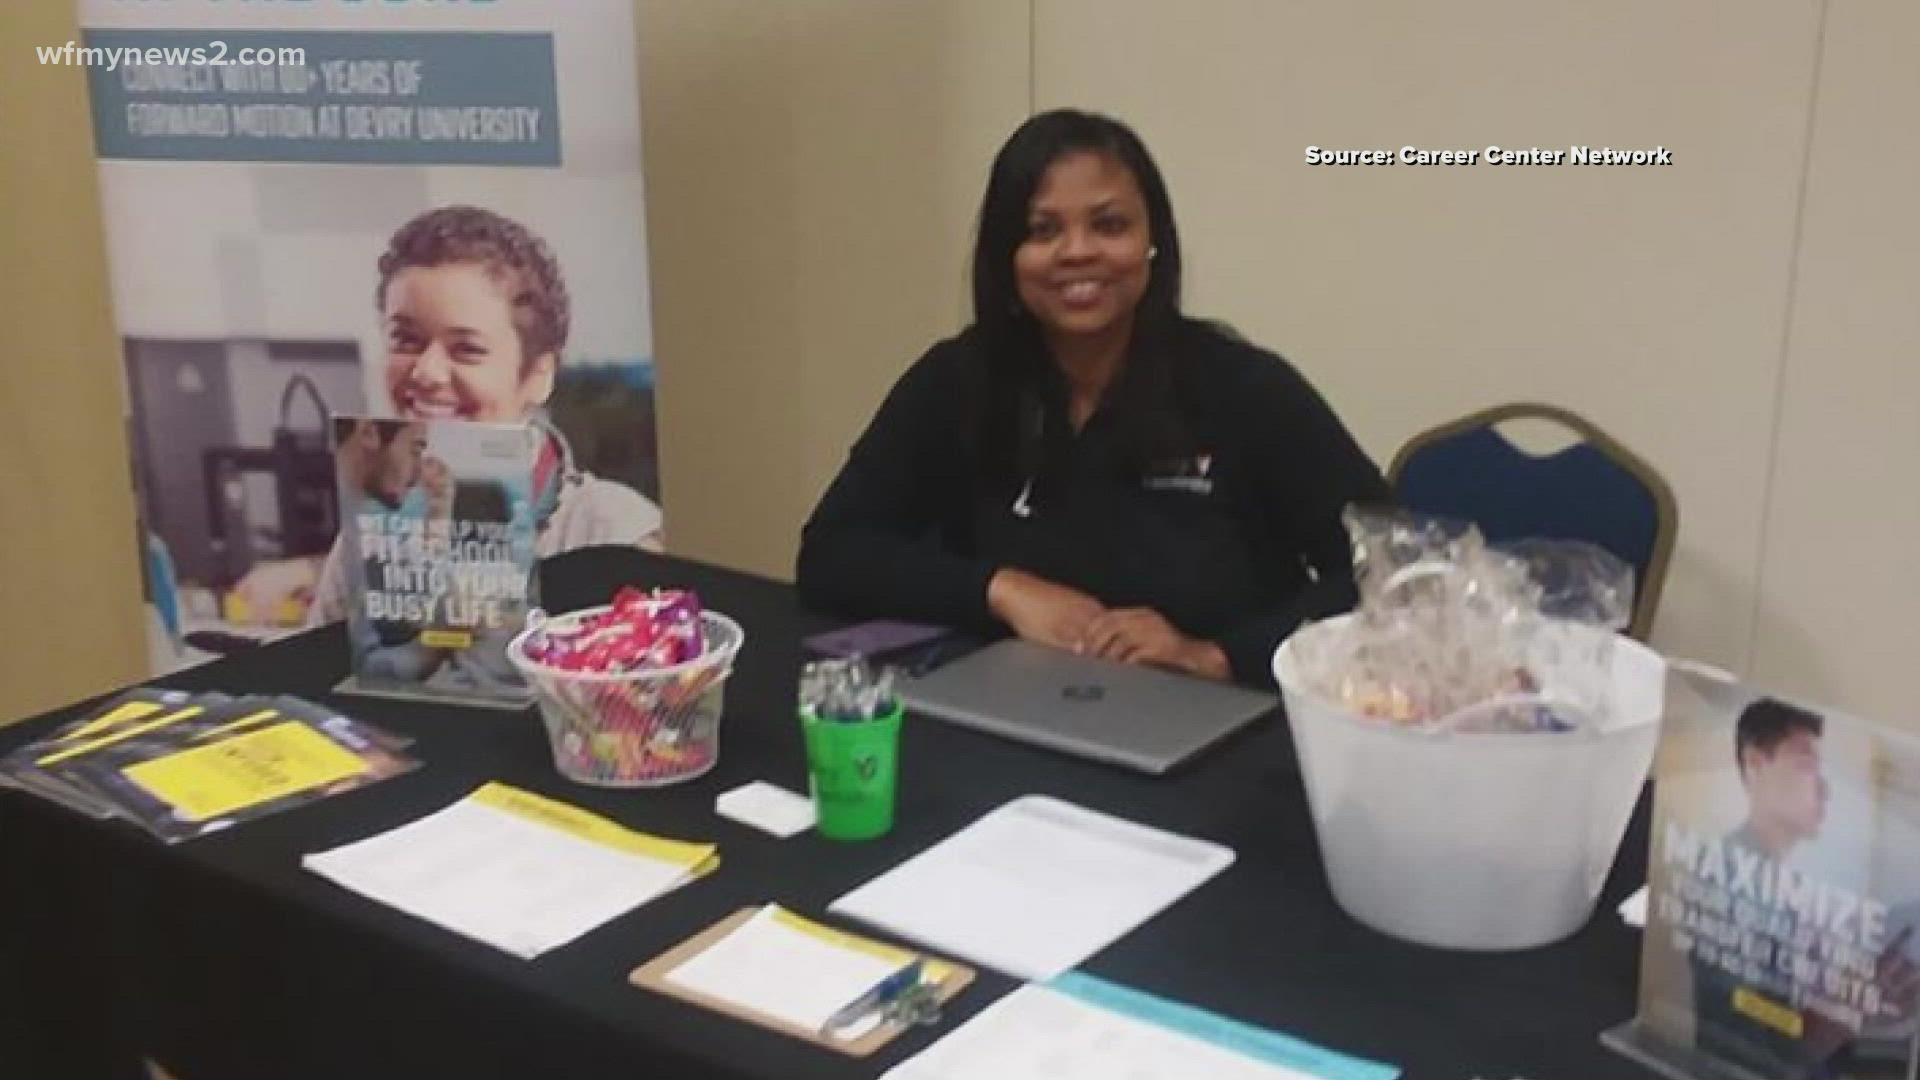 The organization is hosting a free hiring event for FedEx Ground Wednesday in Kernersville.